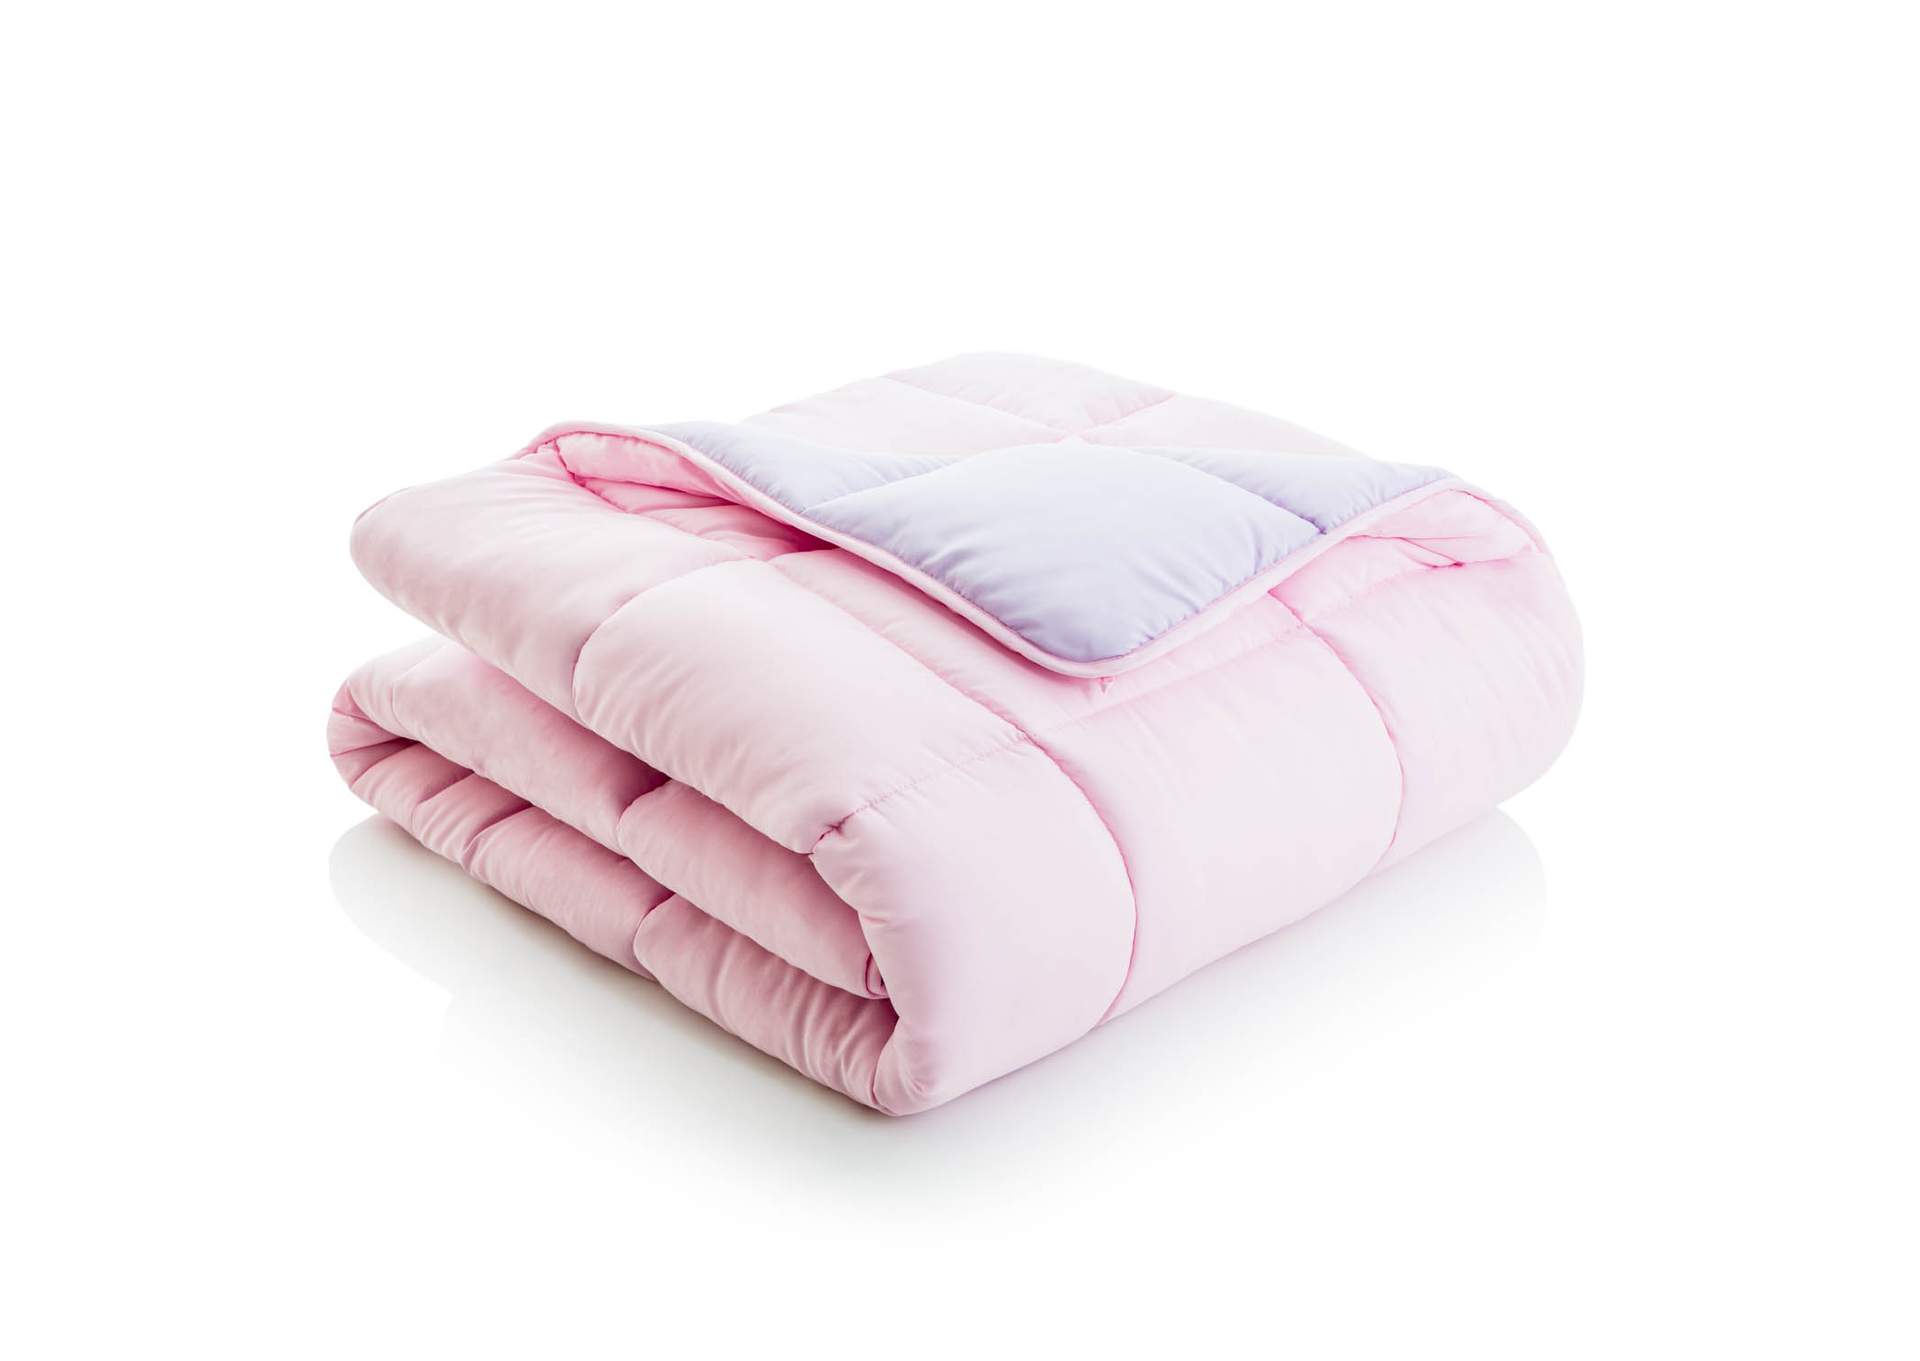 Malouf Lilac/Blush Bed in a Bag Reversible Comforters & Duvets - Full Size,Malouf